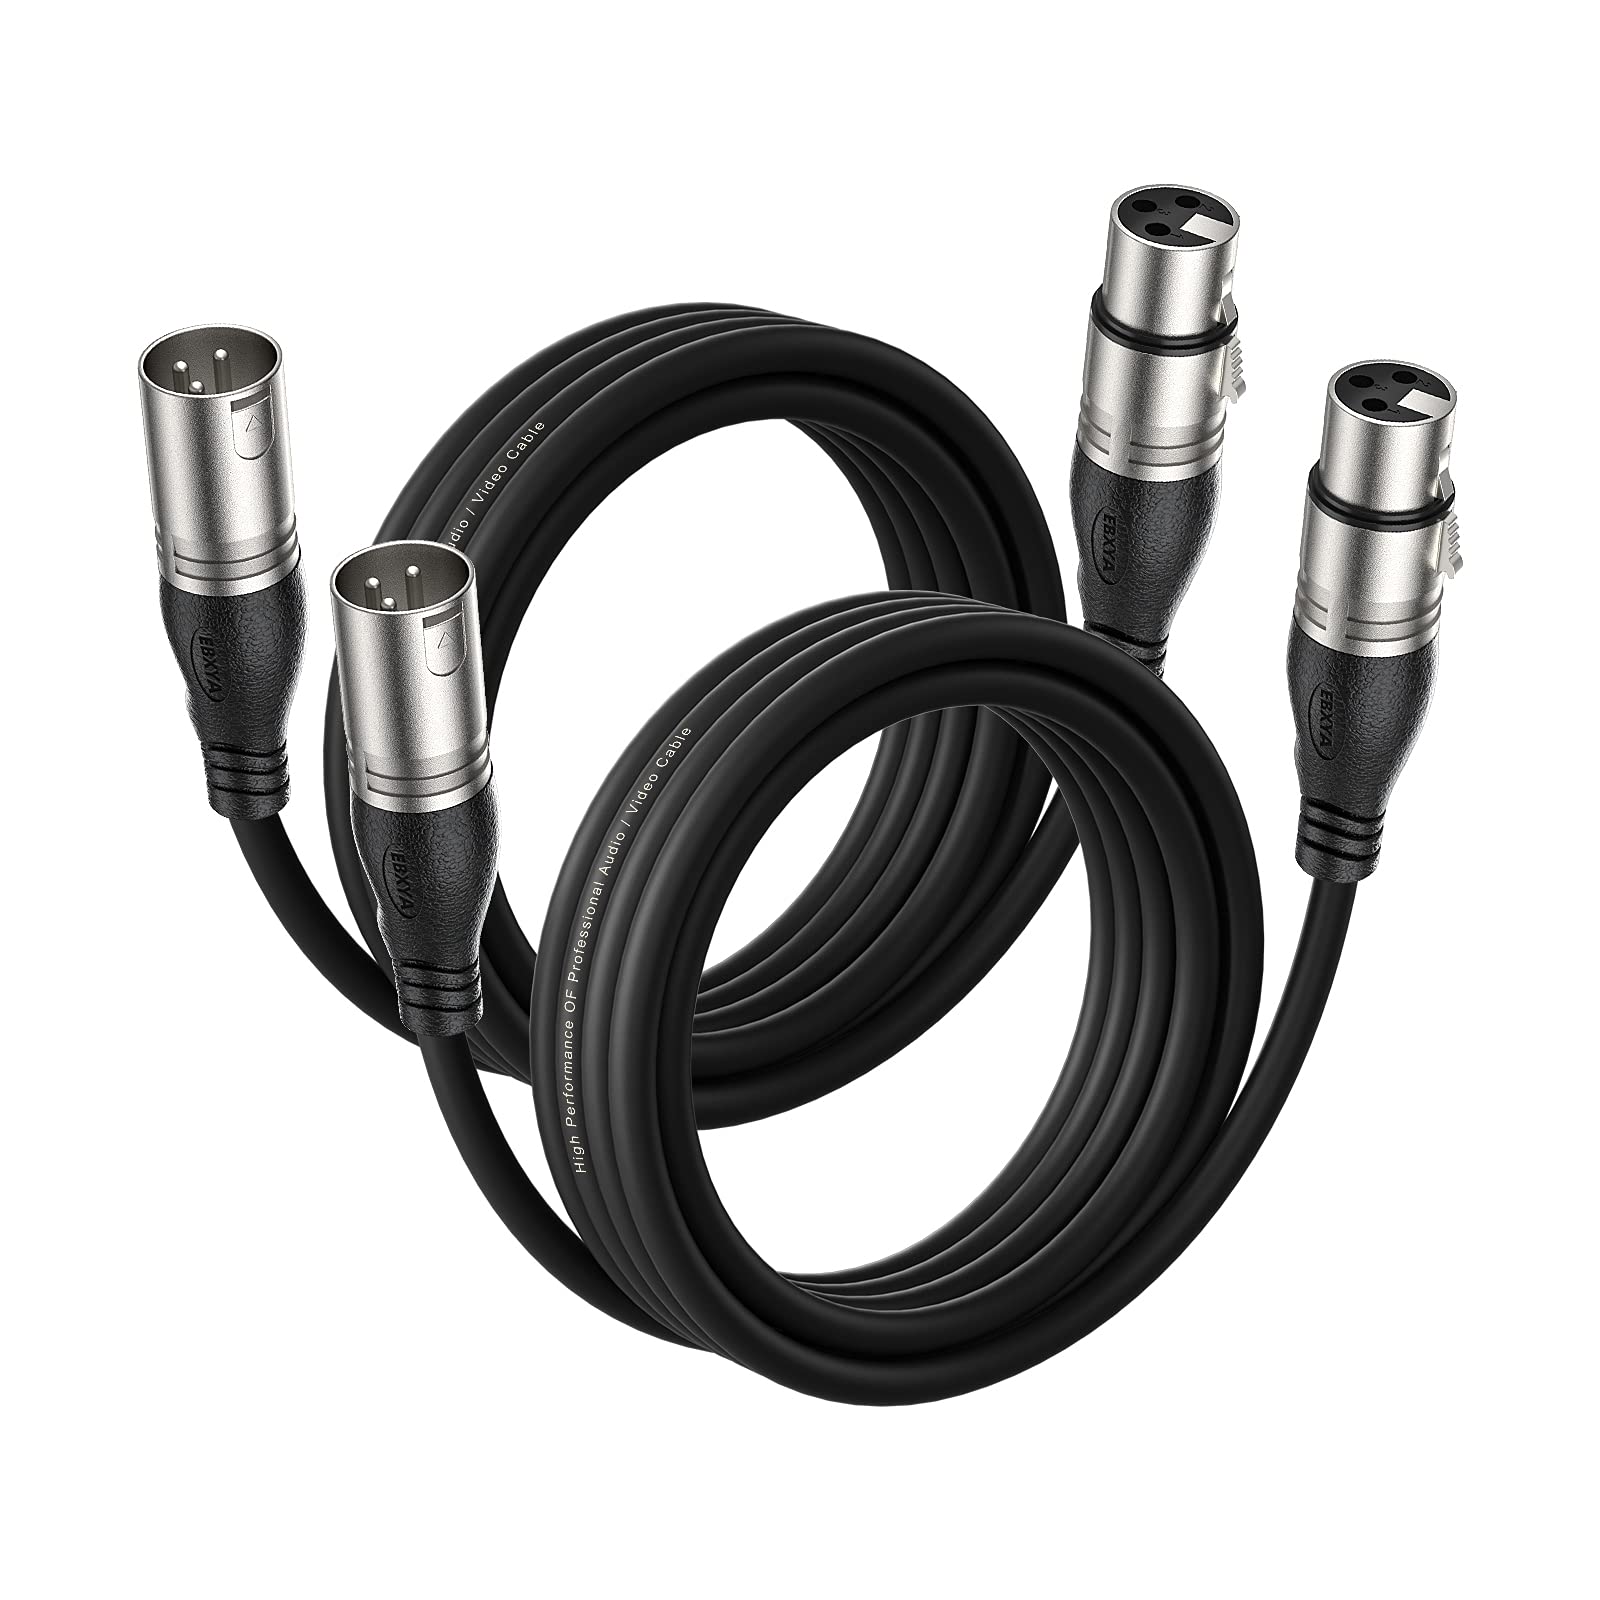 EBXYA XLR Cable- Premium Balanced Microphone Cable with 3-Pin XLR Male to Female Mic Speaker Cable, Black